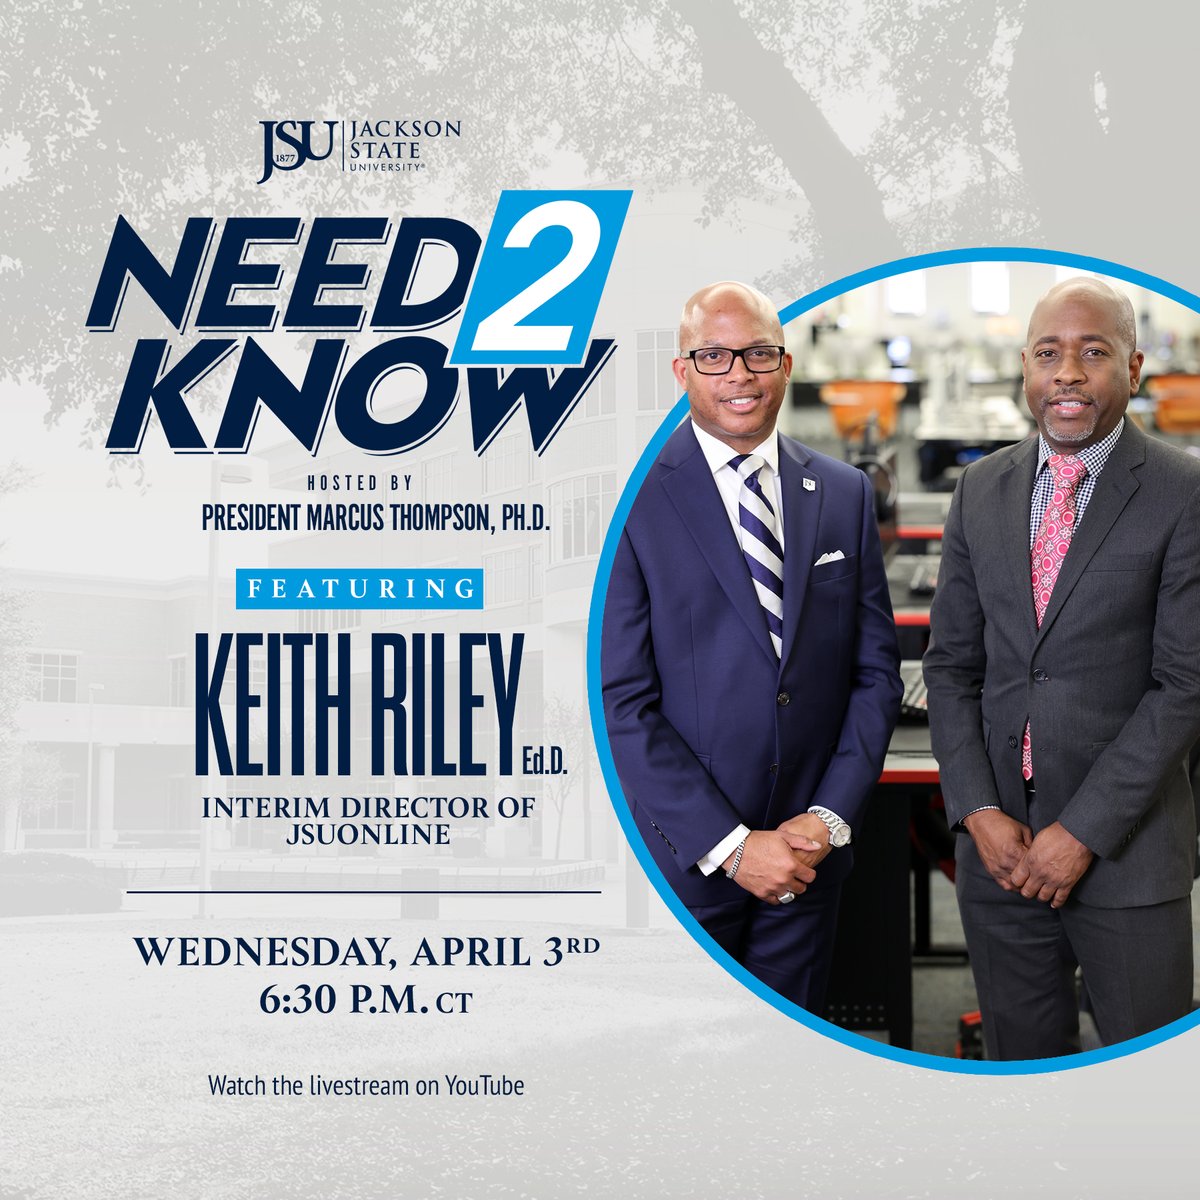 Did you know Jackson State University is one of the “Best HBCUs with Online Degrees of 2024”? Join us for the next edition of #JSUNeed2Know as @JSUPrez13 speaks with JSUOnline Interim Director Keith Riley, Ed.D., about what makes JSU’s programs so popular. #JSUElevate